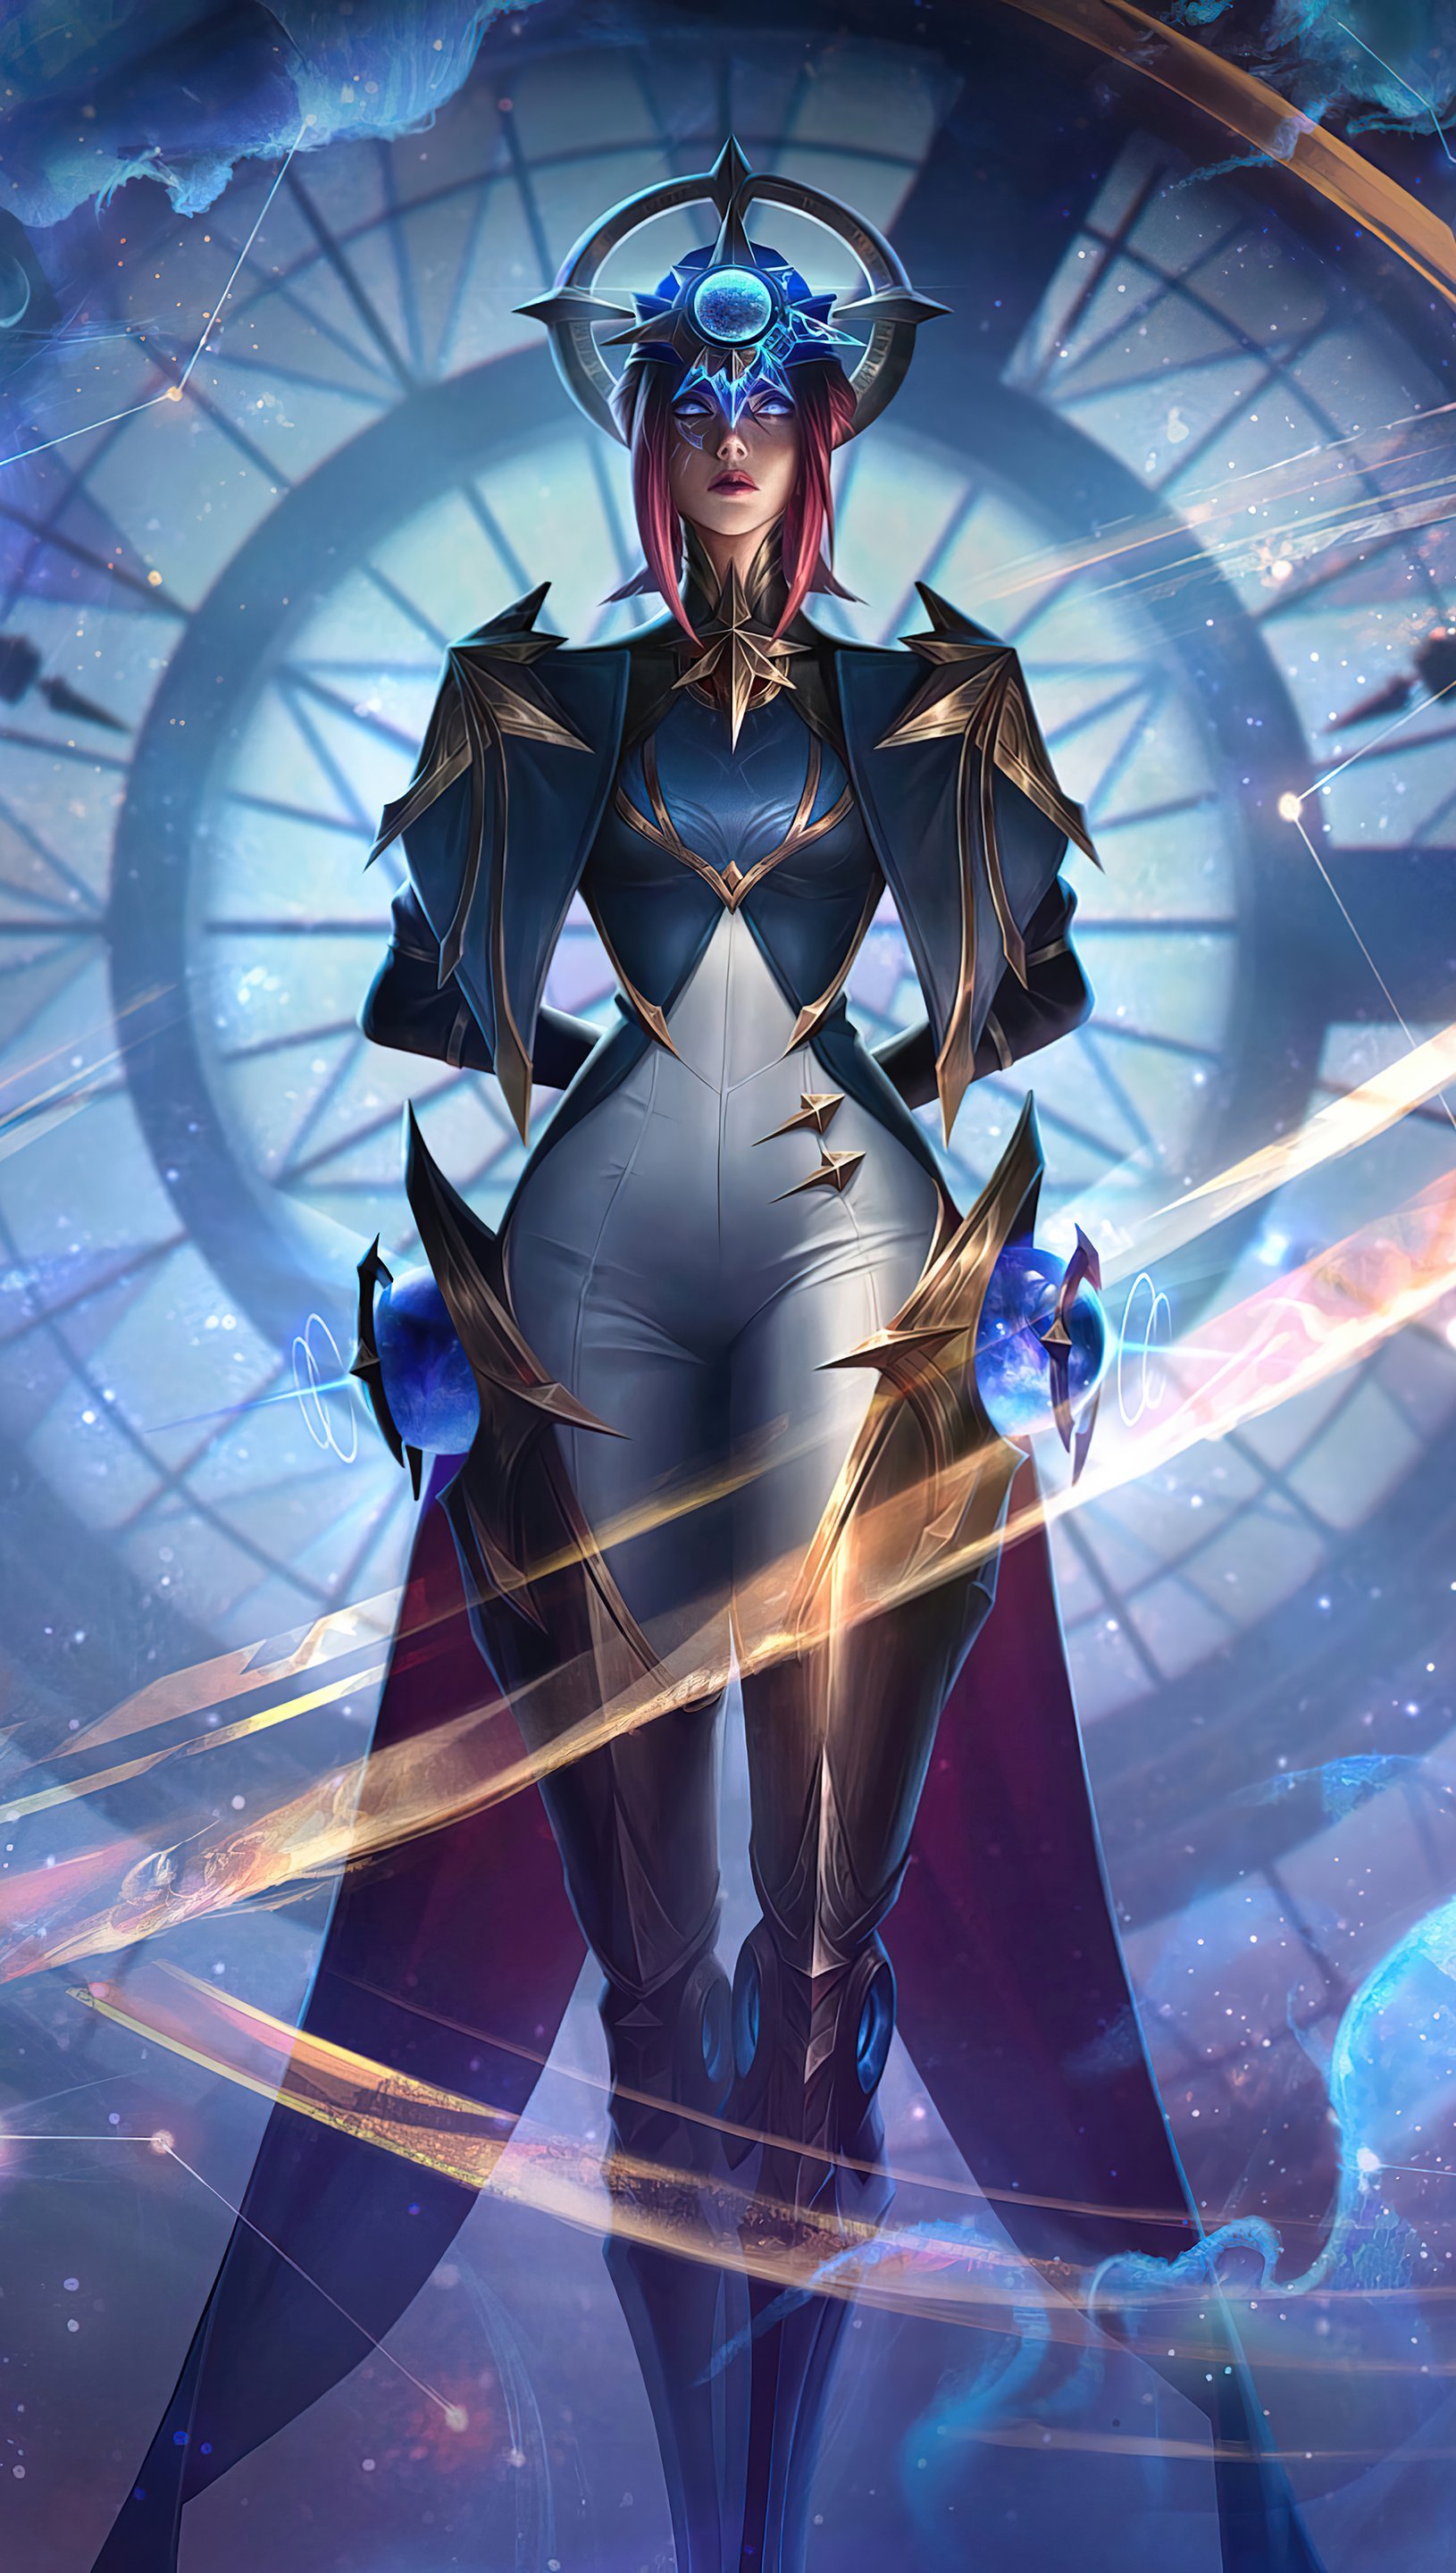 Camille Wallpapers